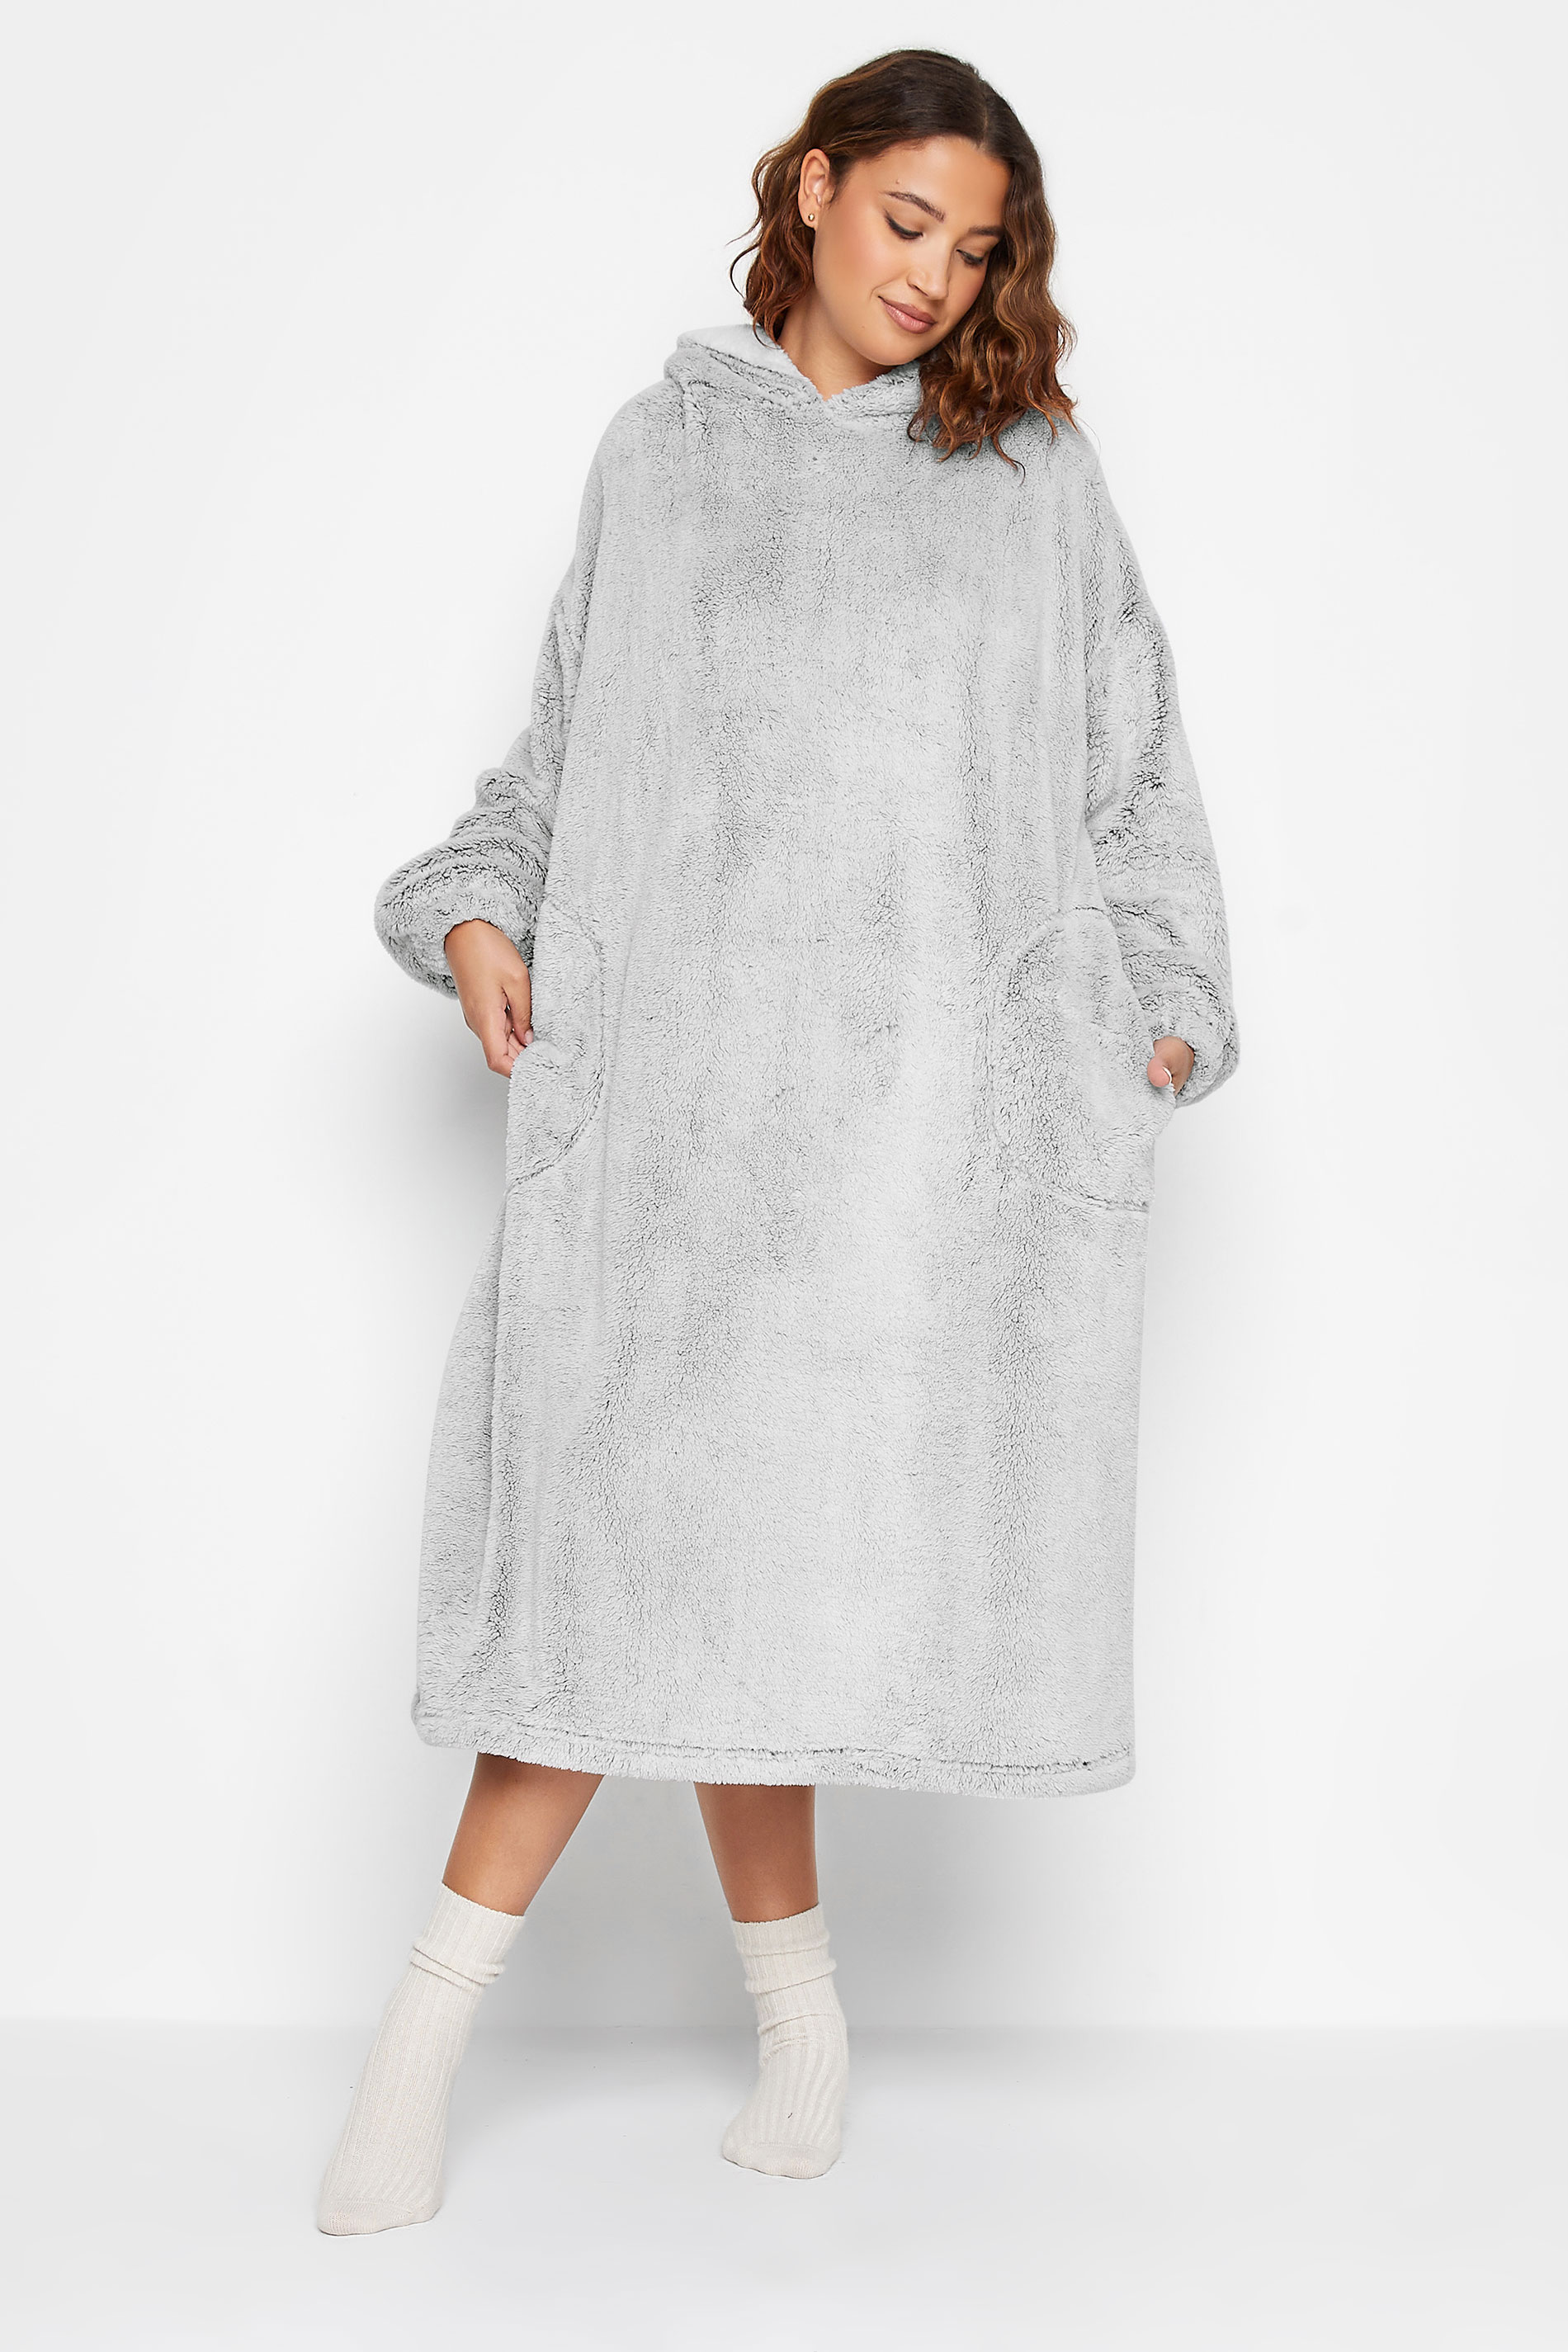 LTS Tall Women's Grey Soft Touch Snuggle Hoodie | Long Tall Sally 2